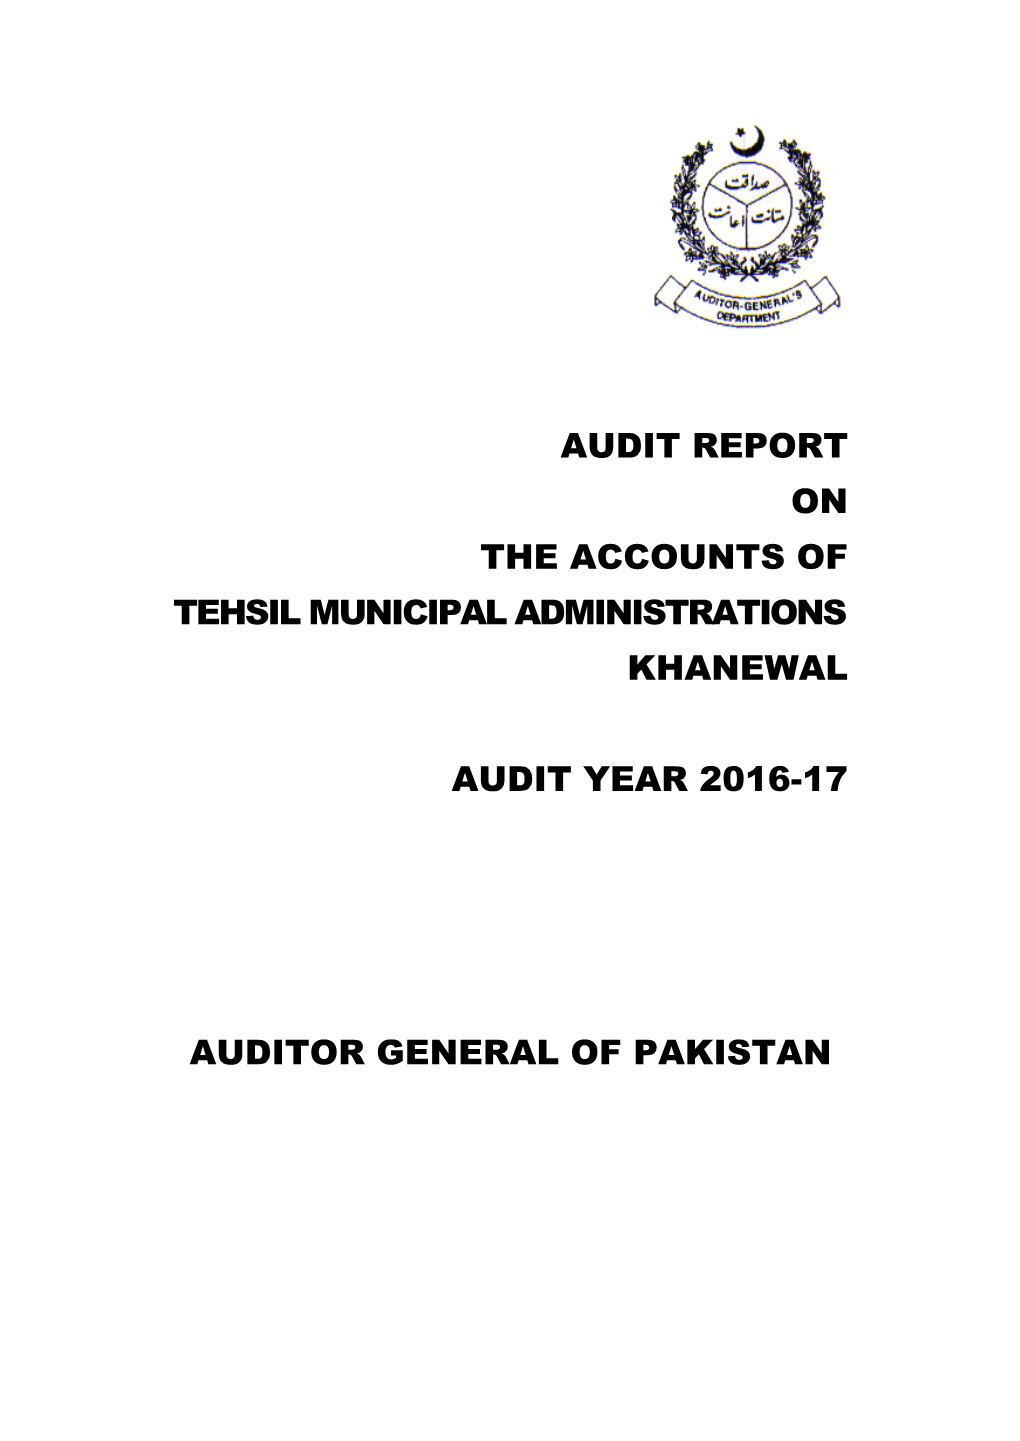 Audit Report on the Accounts of Tehsil Municipal Administrations Khanewal Audit Year 2016-17 Auditor General of Pakistan